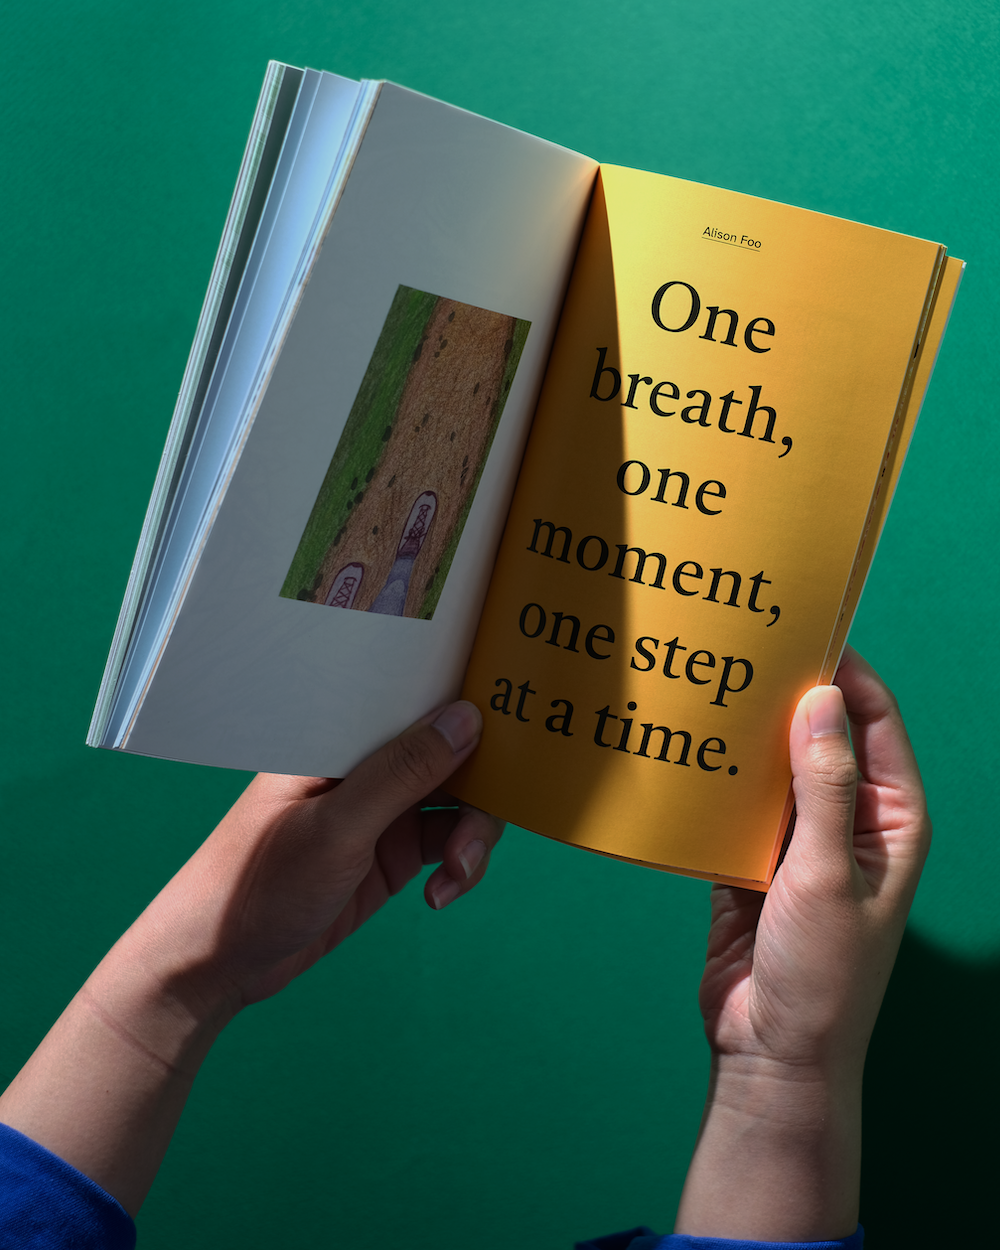 A photo of two hands holding an open book on a green background.